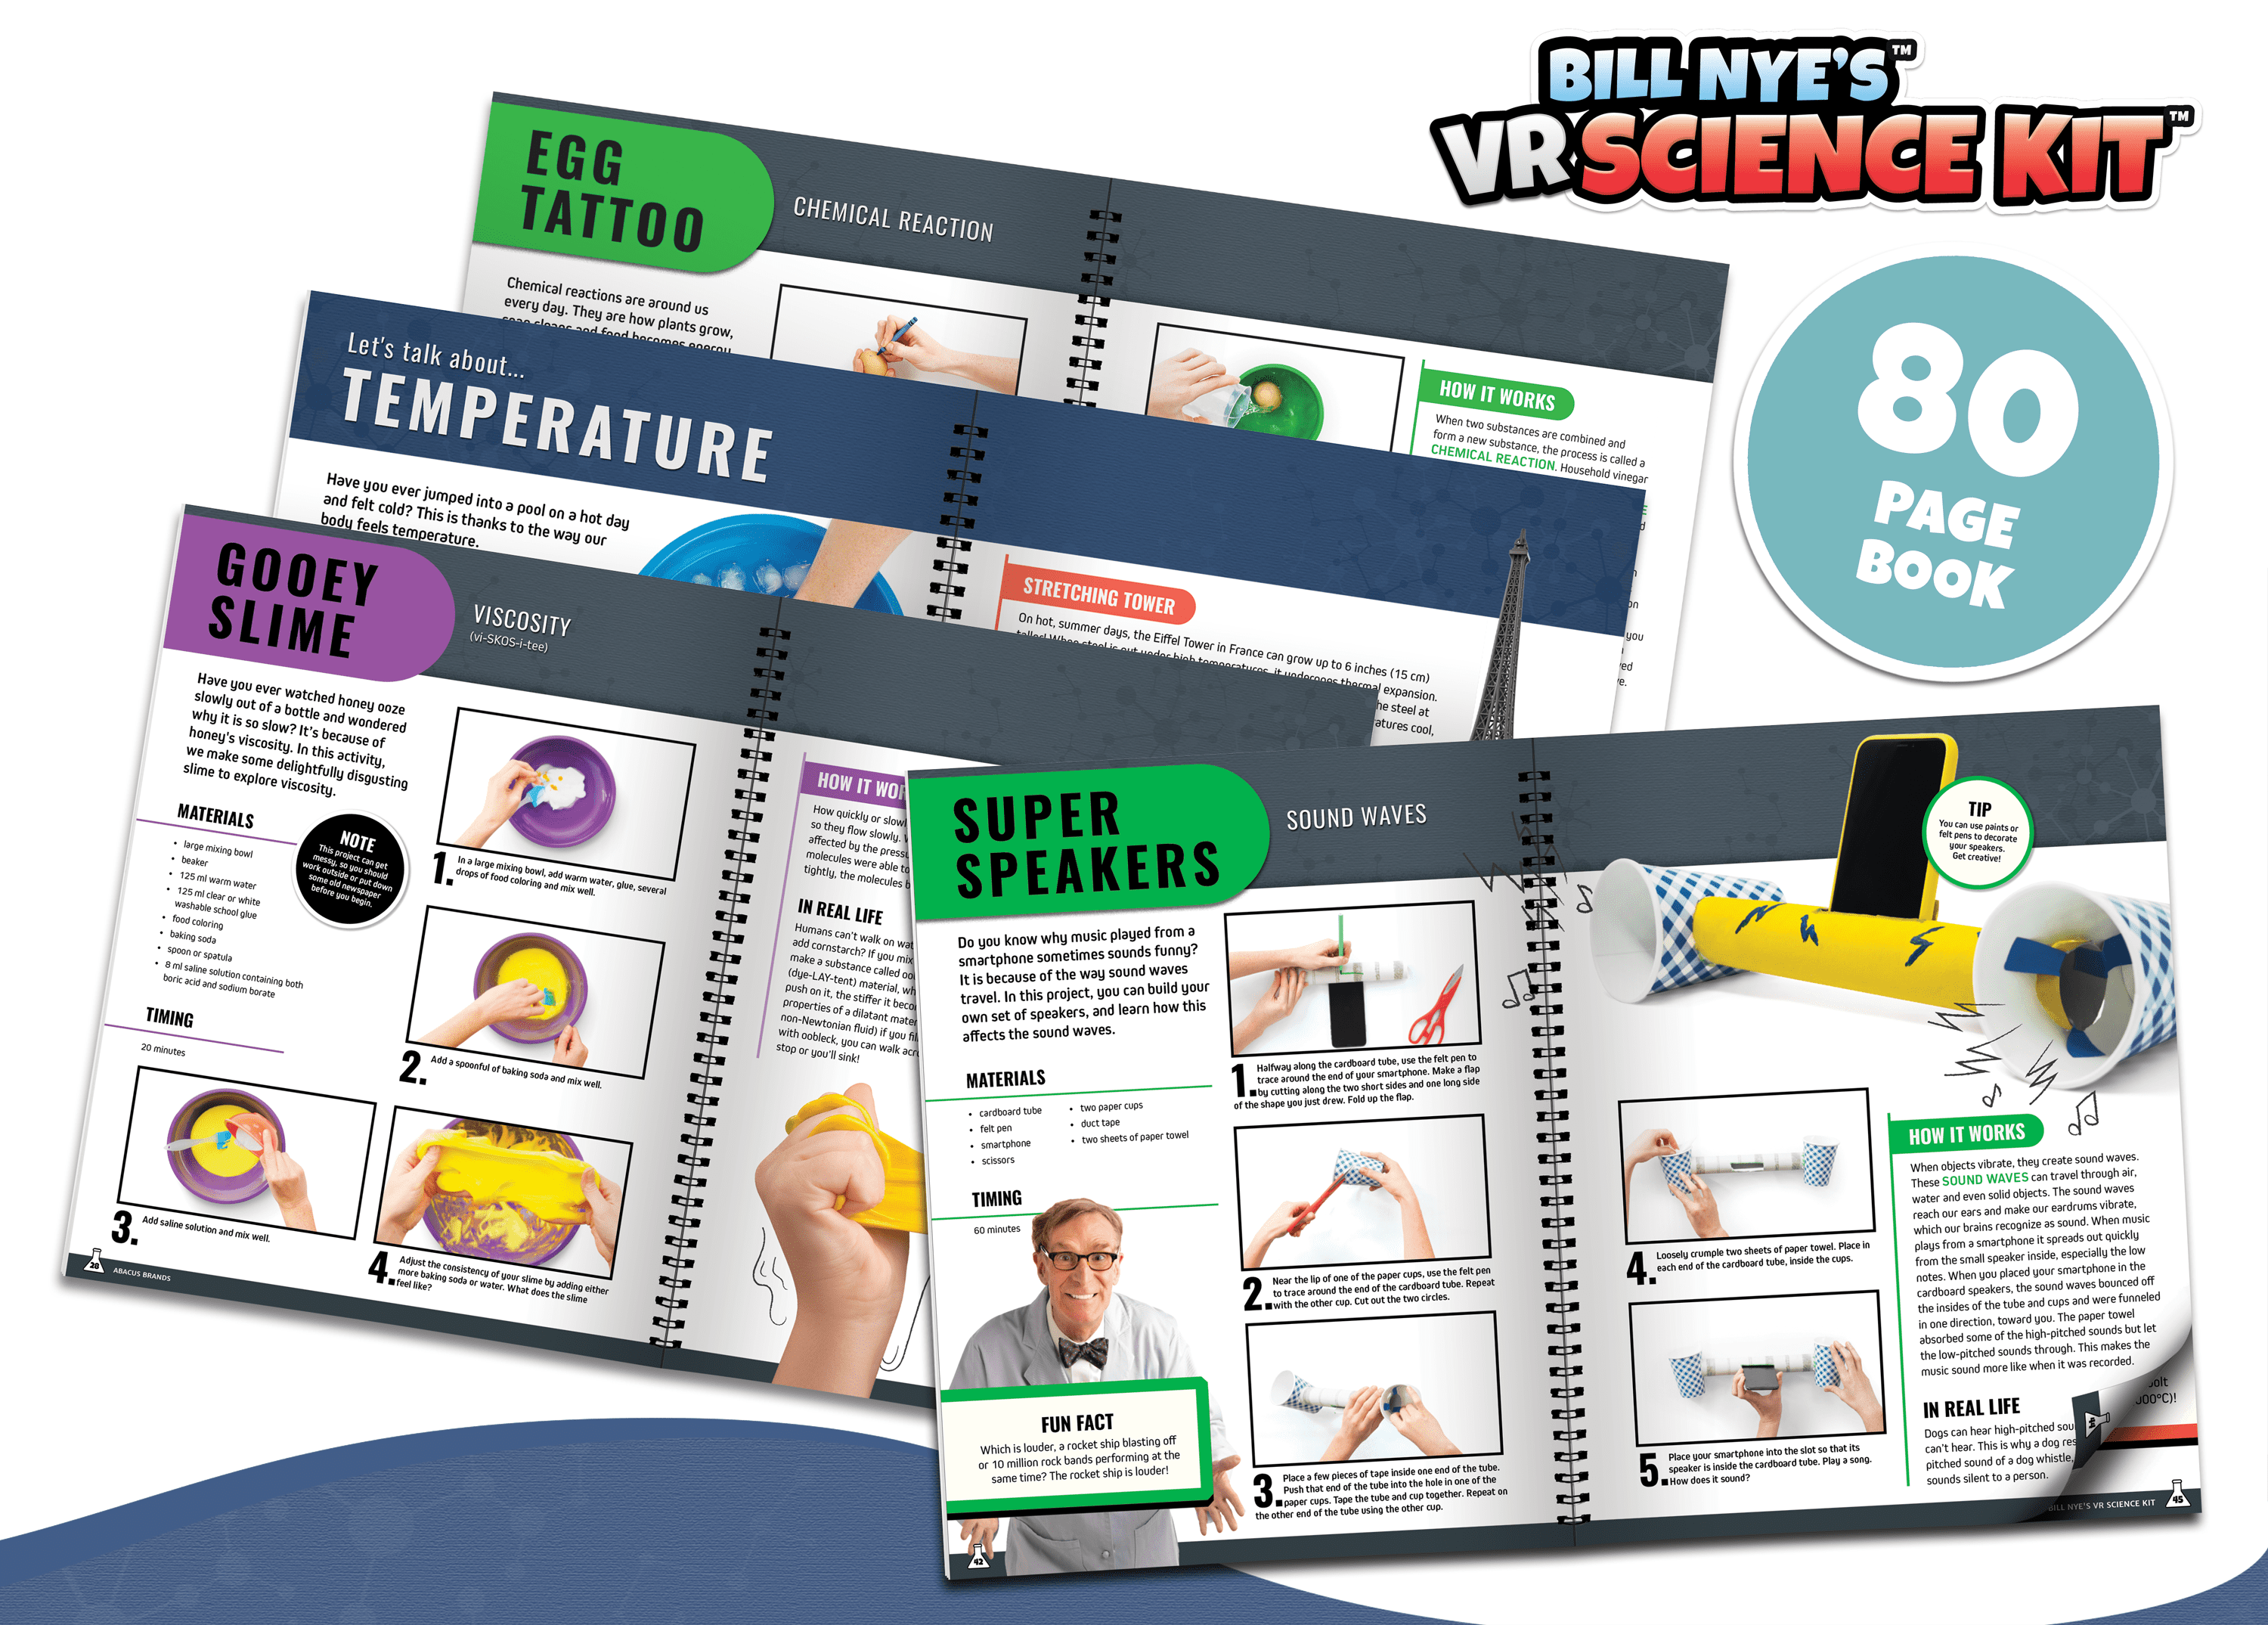 Expansion Pack (NO GOGGLES) Bill Nye's: - VR Science Kit